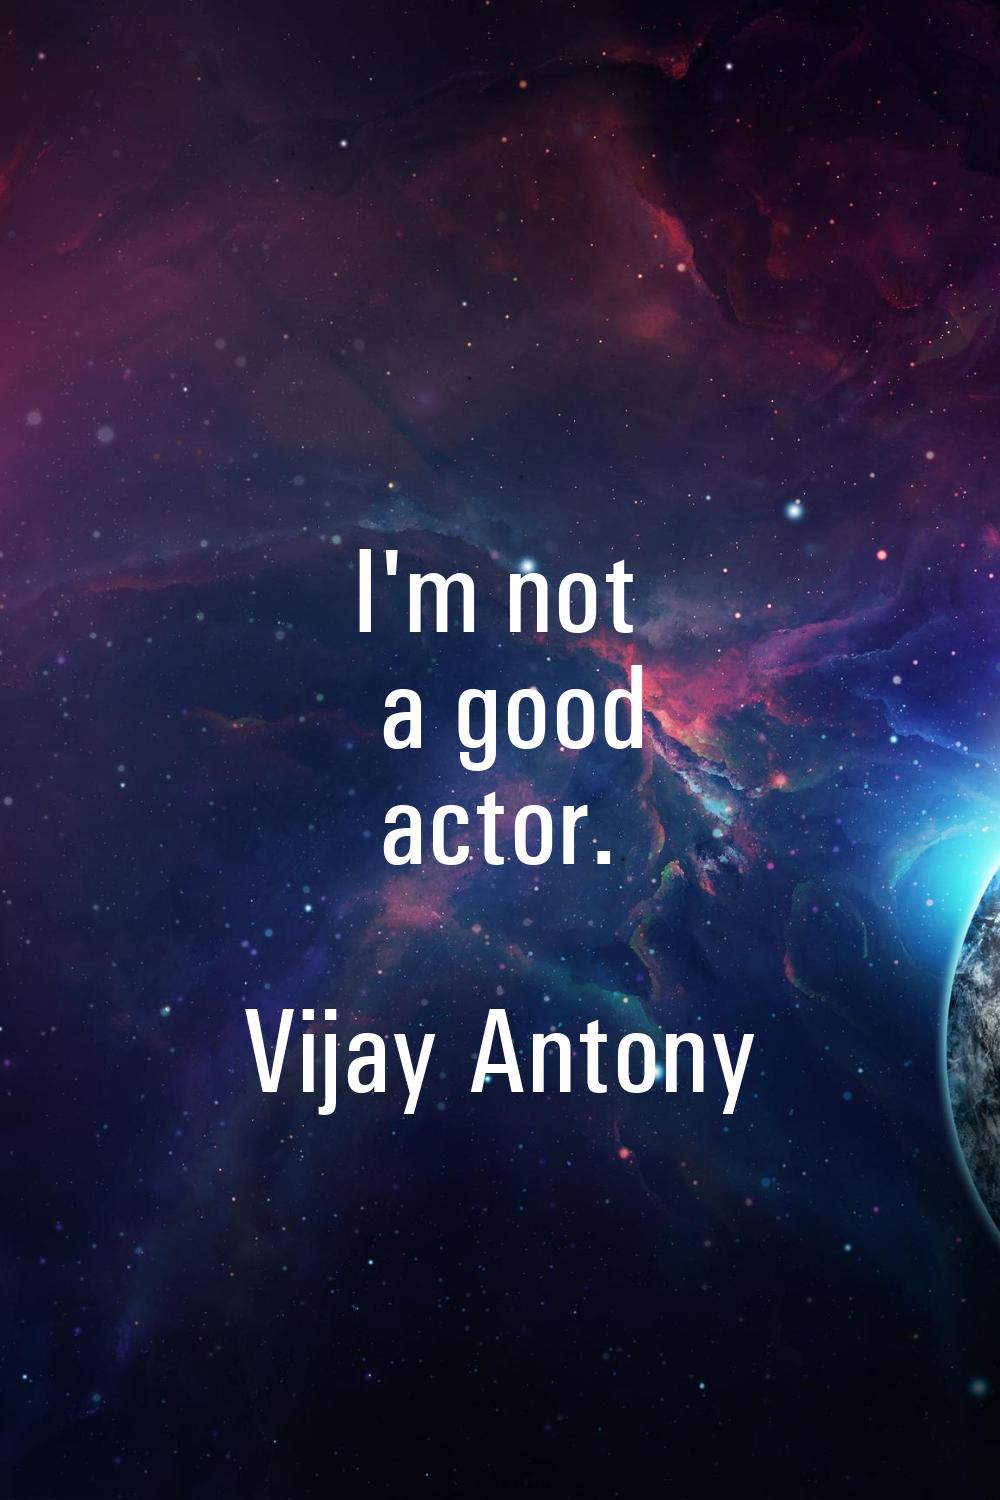 I'm not a good actor.